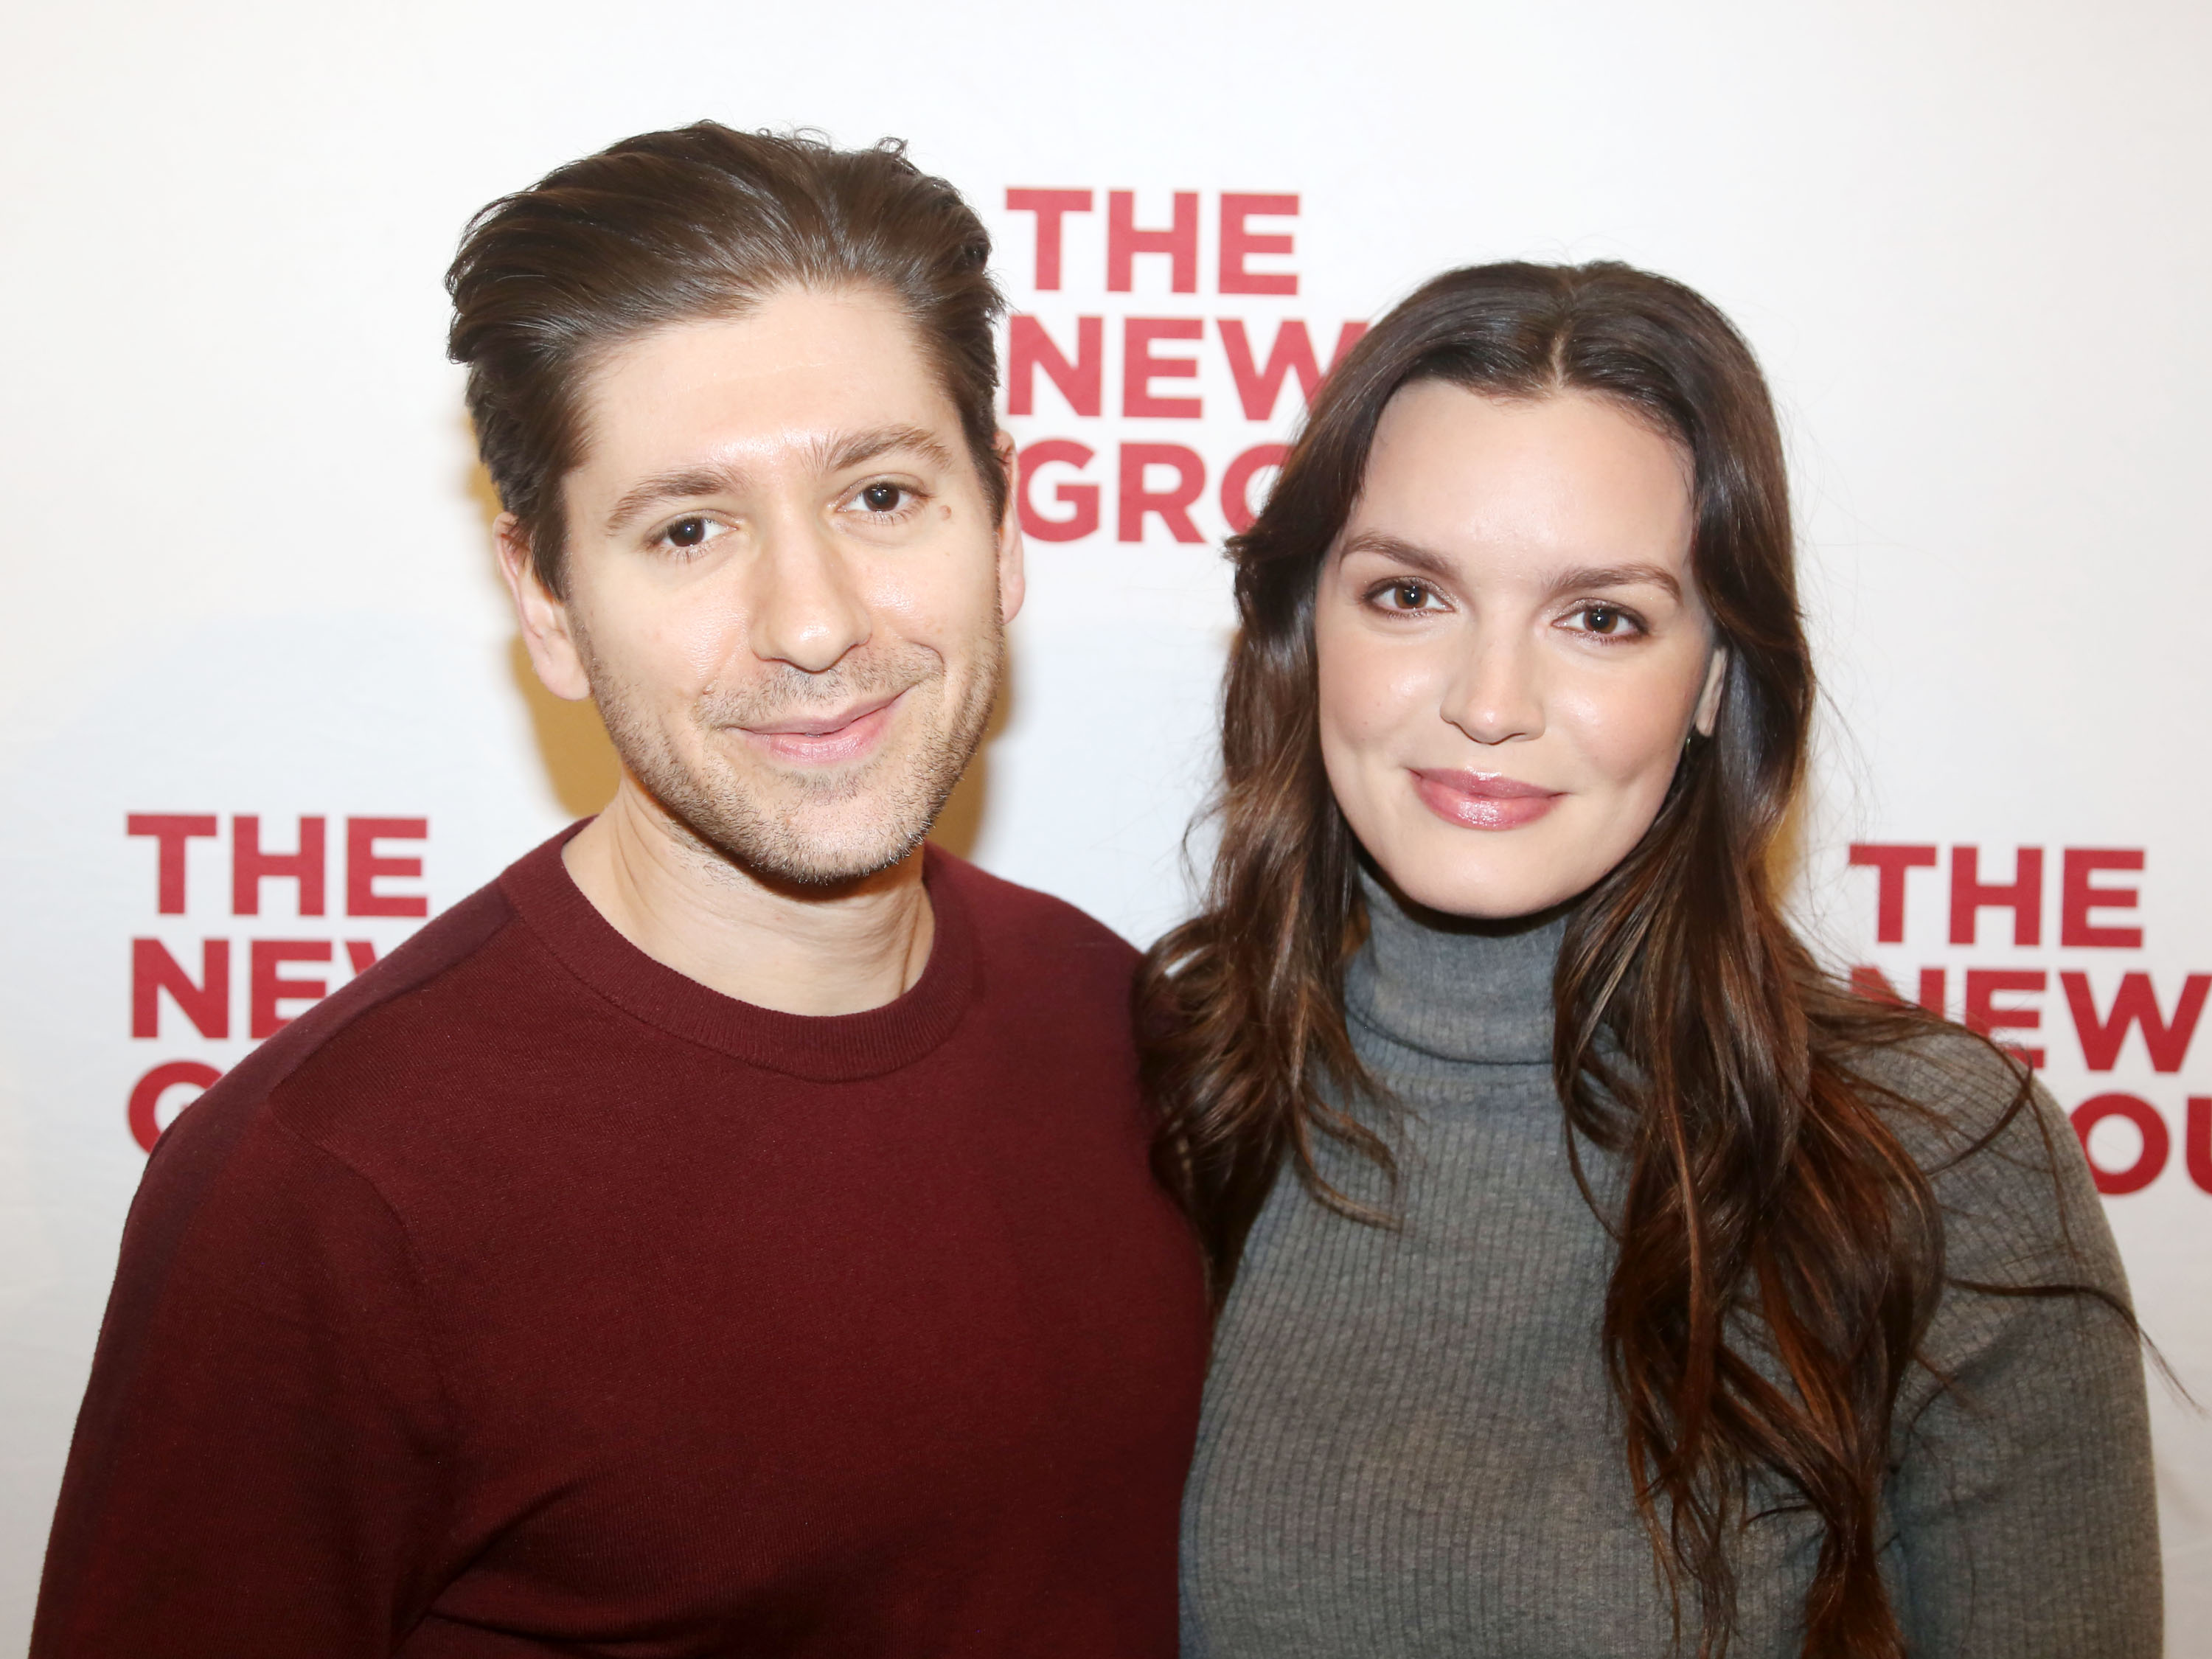 Michael Zegen and Jennifer Damiano pose at the opening night of The New Group production of the play "The Seagull/Woodstock, NY" at The Linney Theater on February 26, 2023, in New York City. | Source: Getty Images